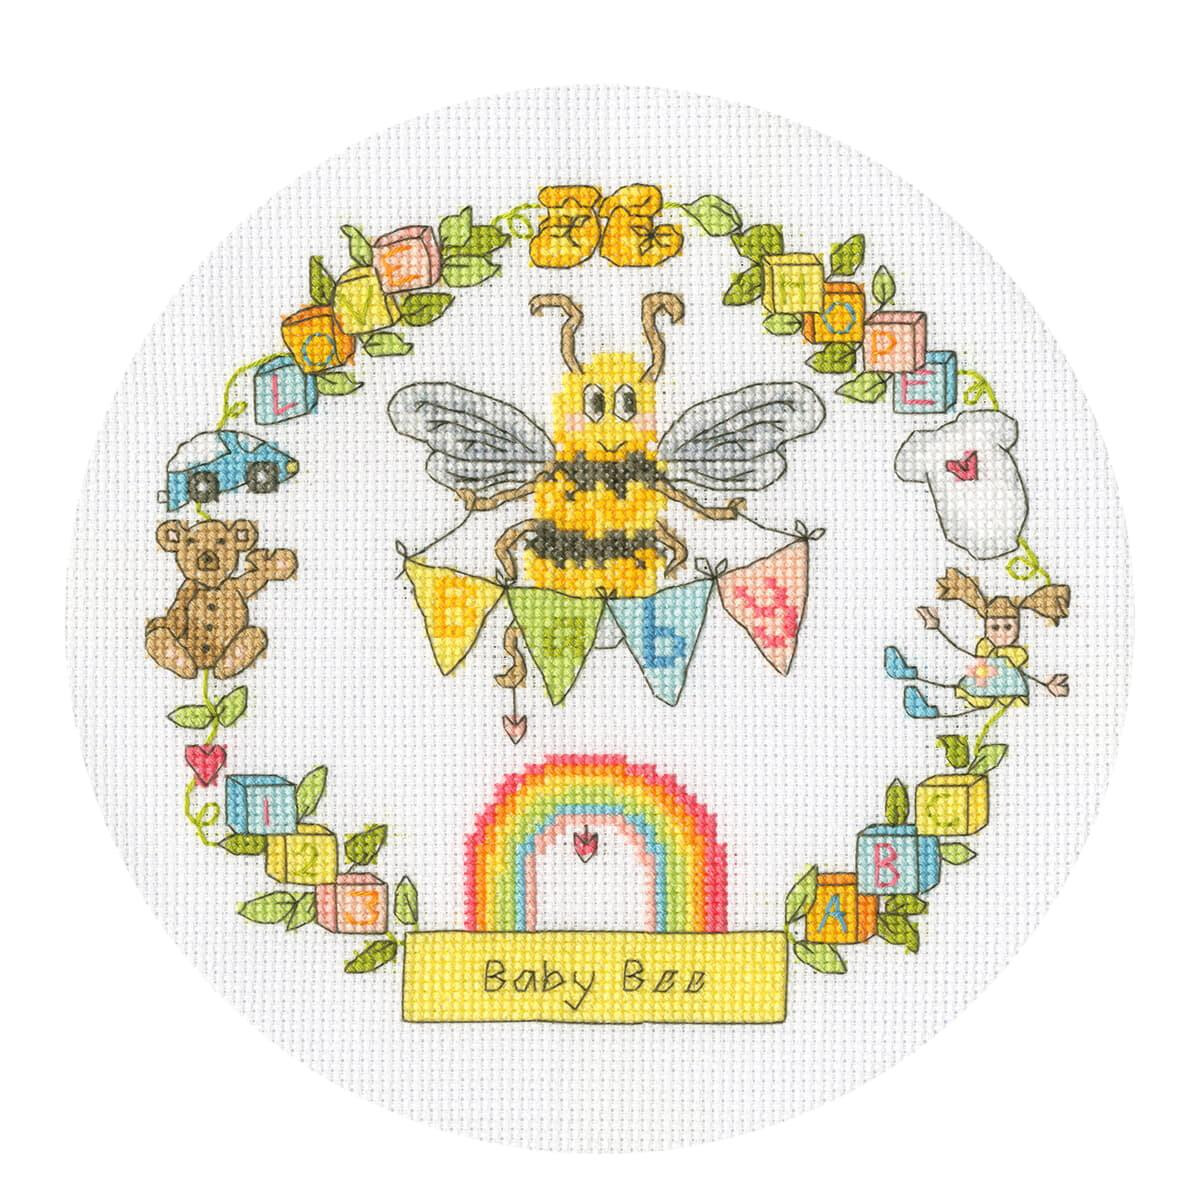 A circular cross stitch pattern or embroidery pack with a...